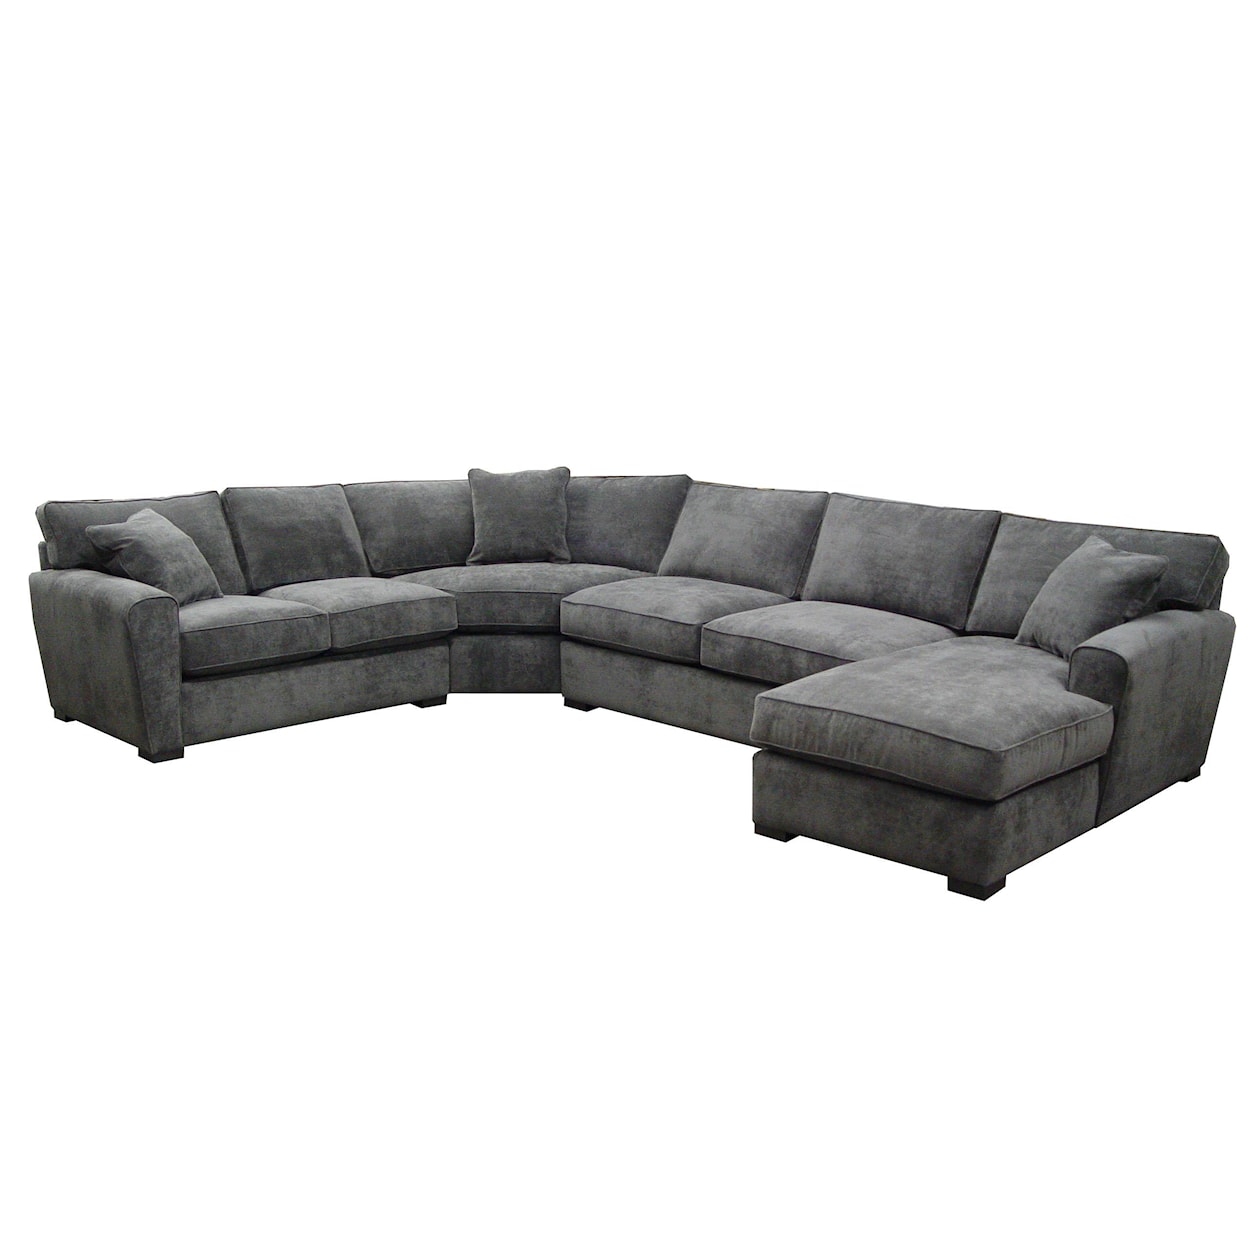 Jonathan Louis Choices Program 4-Piece Chaise Sectional 